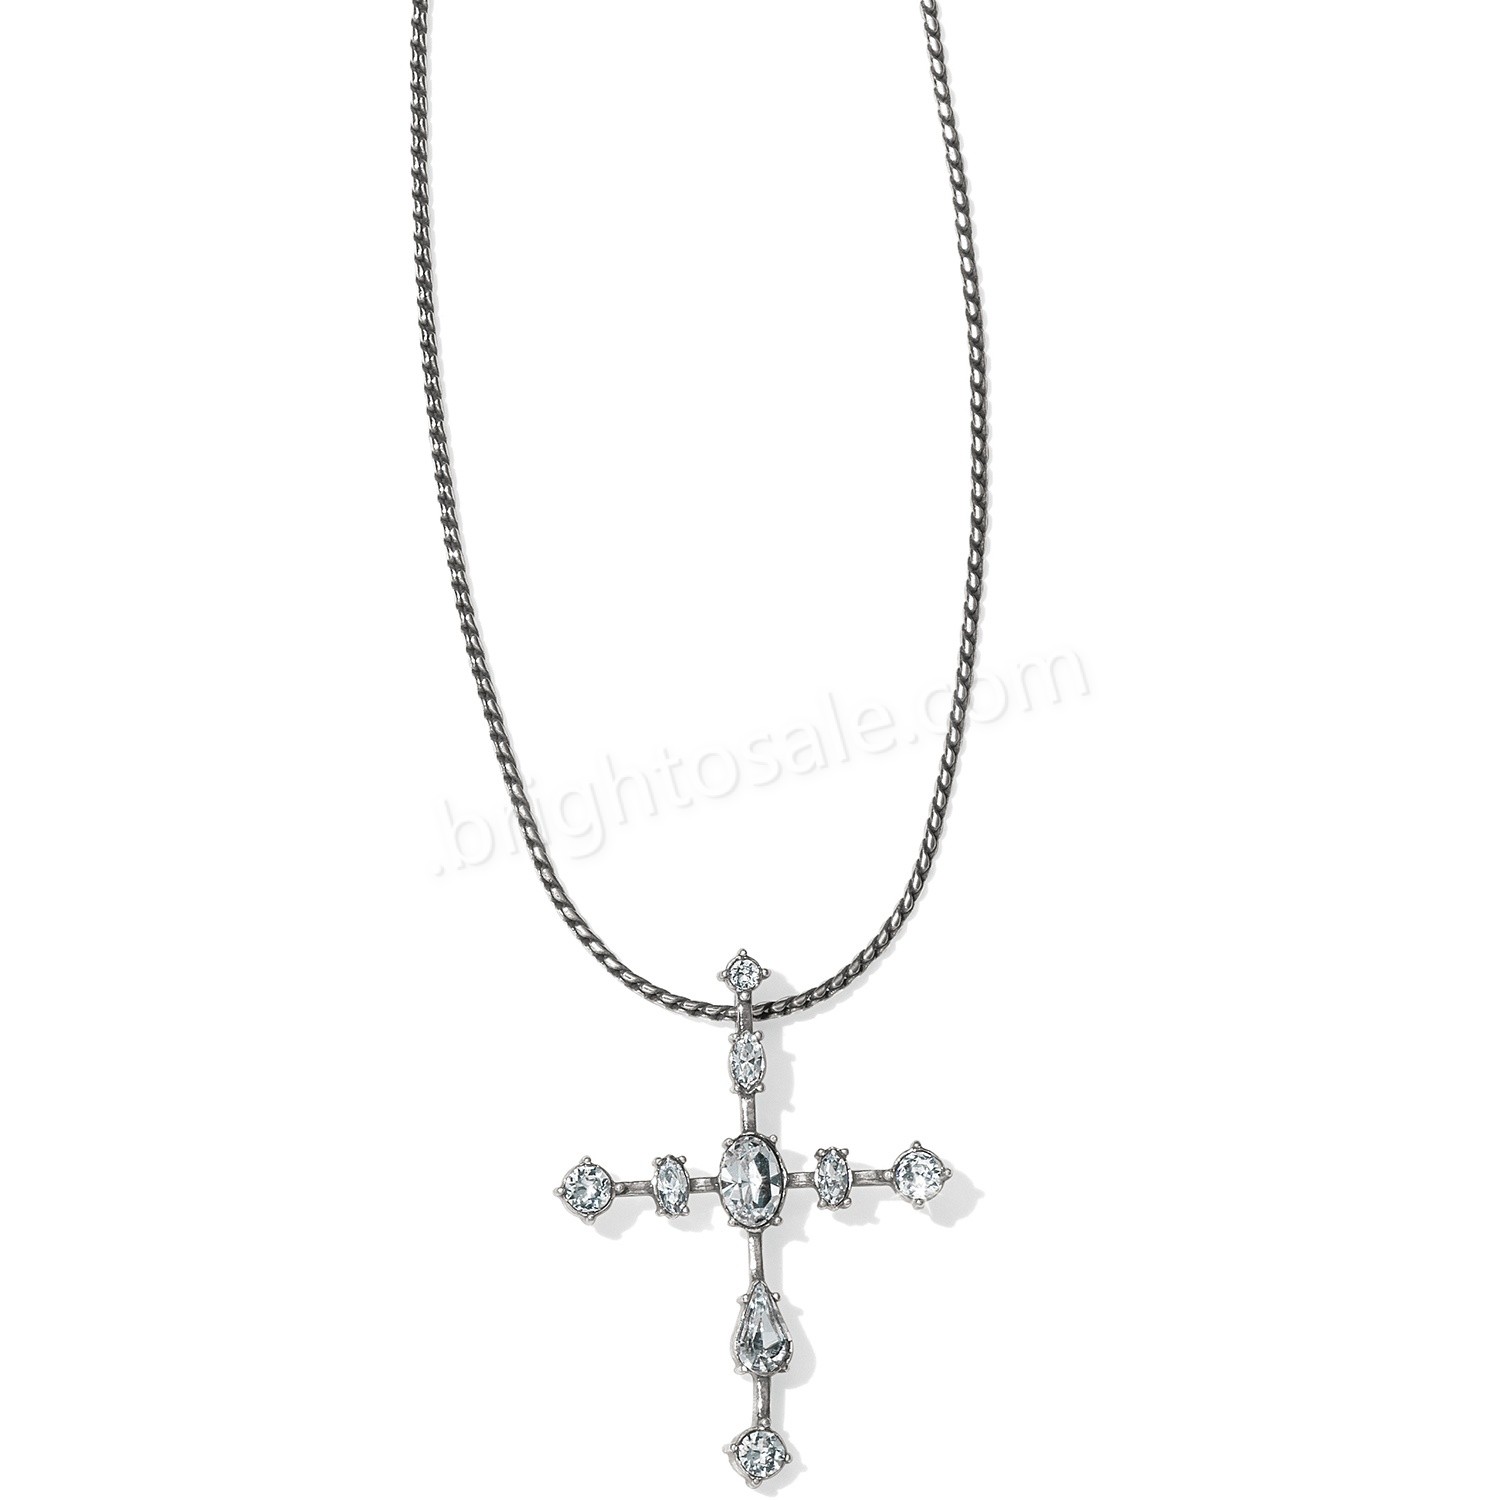 Brighton Collectibles & Online Discount One Love Cross Necklace - Brighton Collectibles & Online Discount One Love Cross Necklace